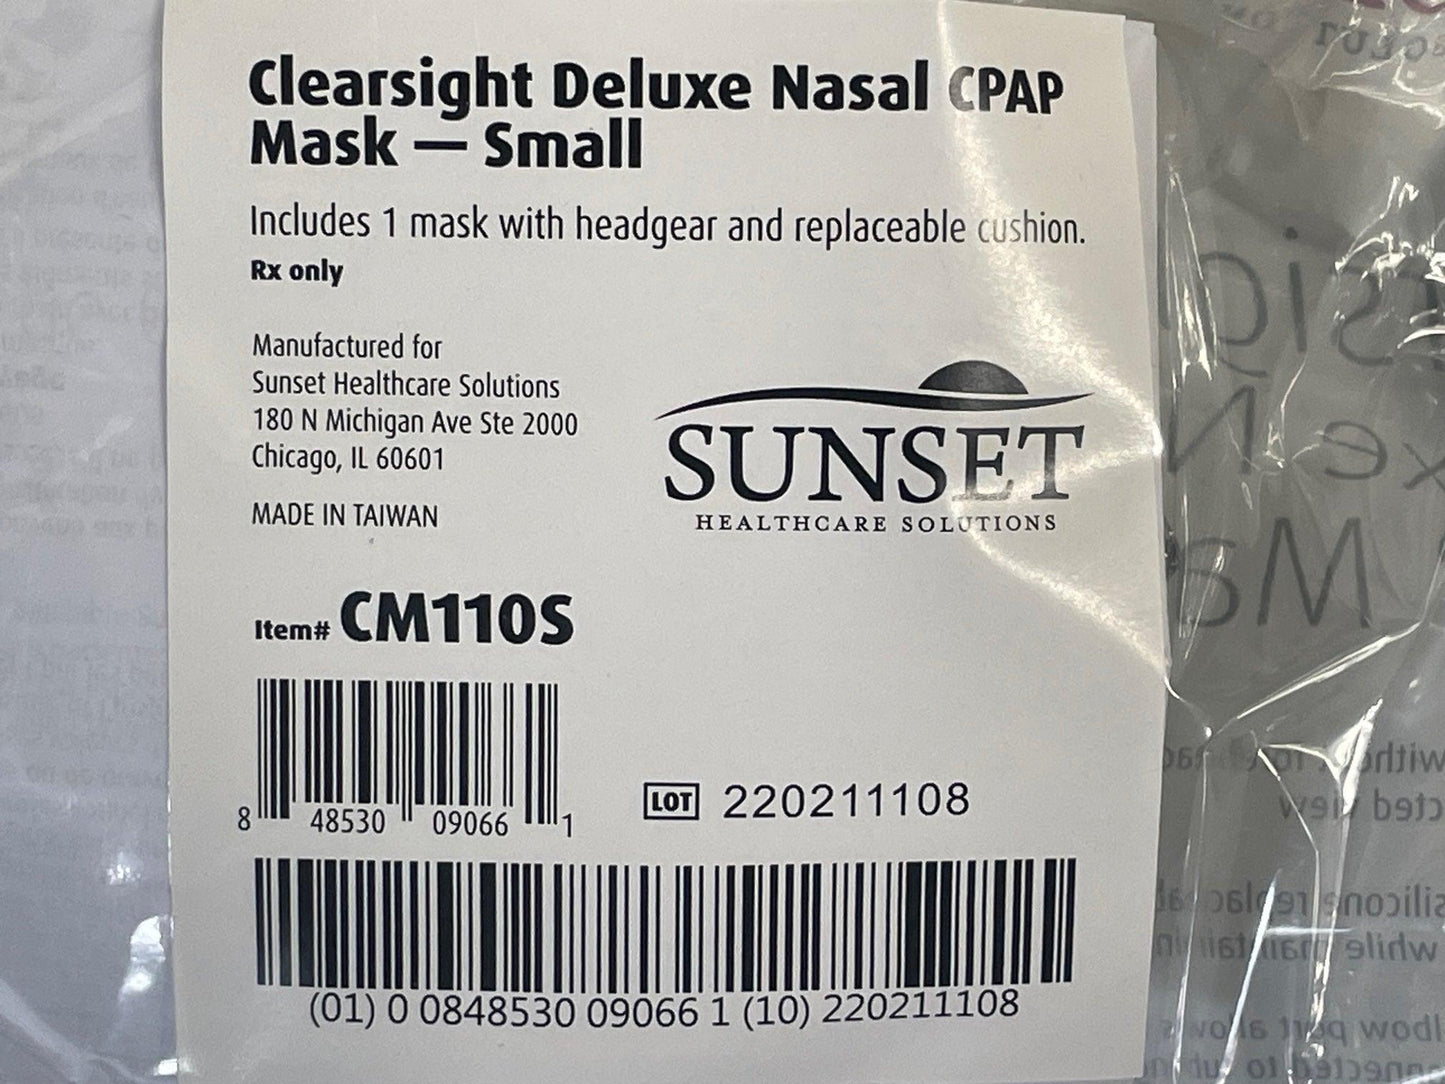 NEW Small Sunset Healthcare Clearsight Deluxe CPAP Nasal Mask CM110S - MBR Medicals